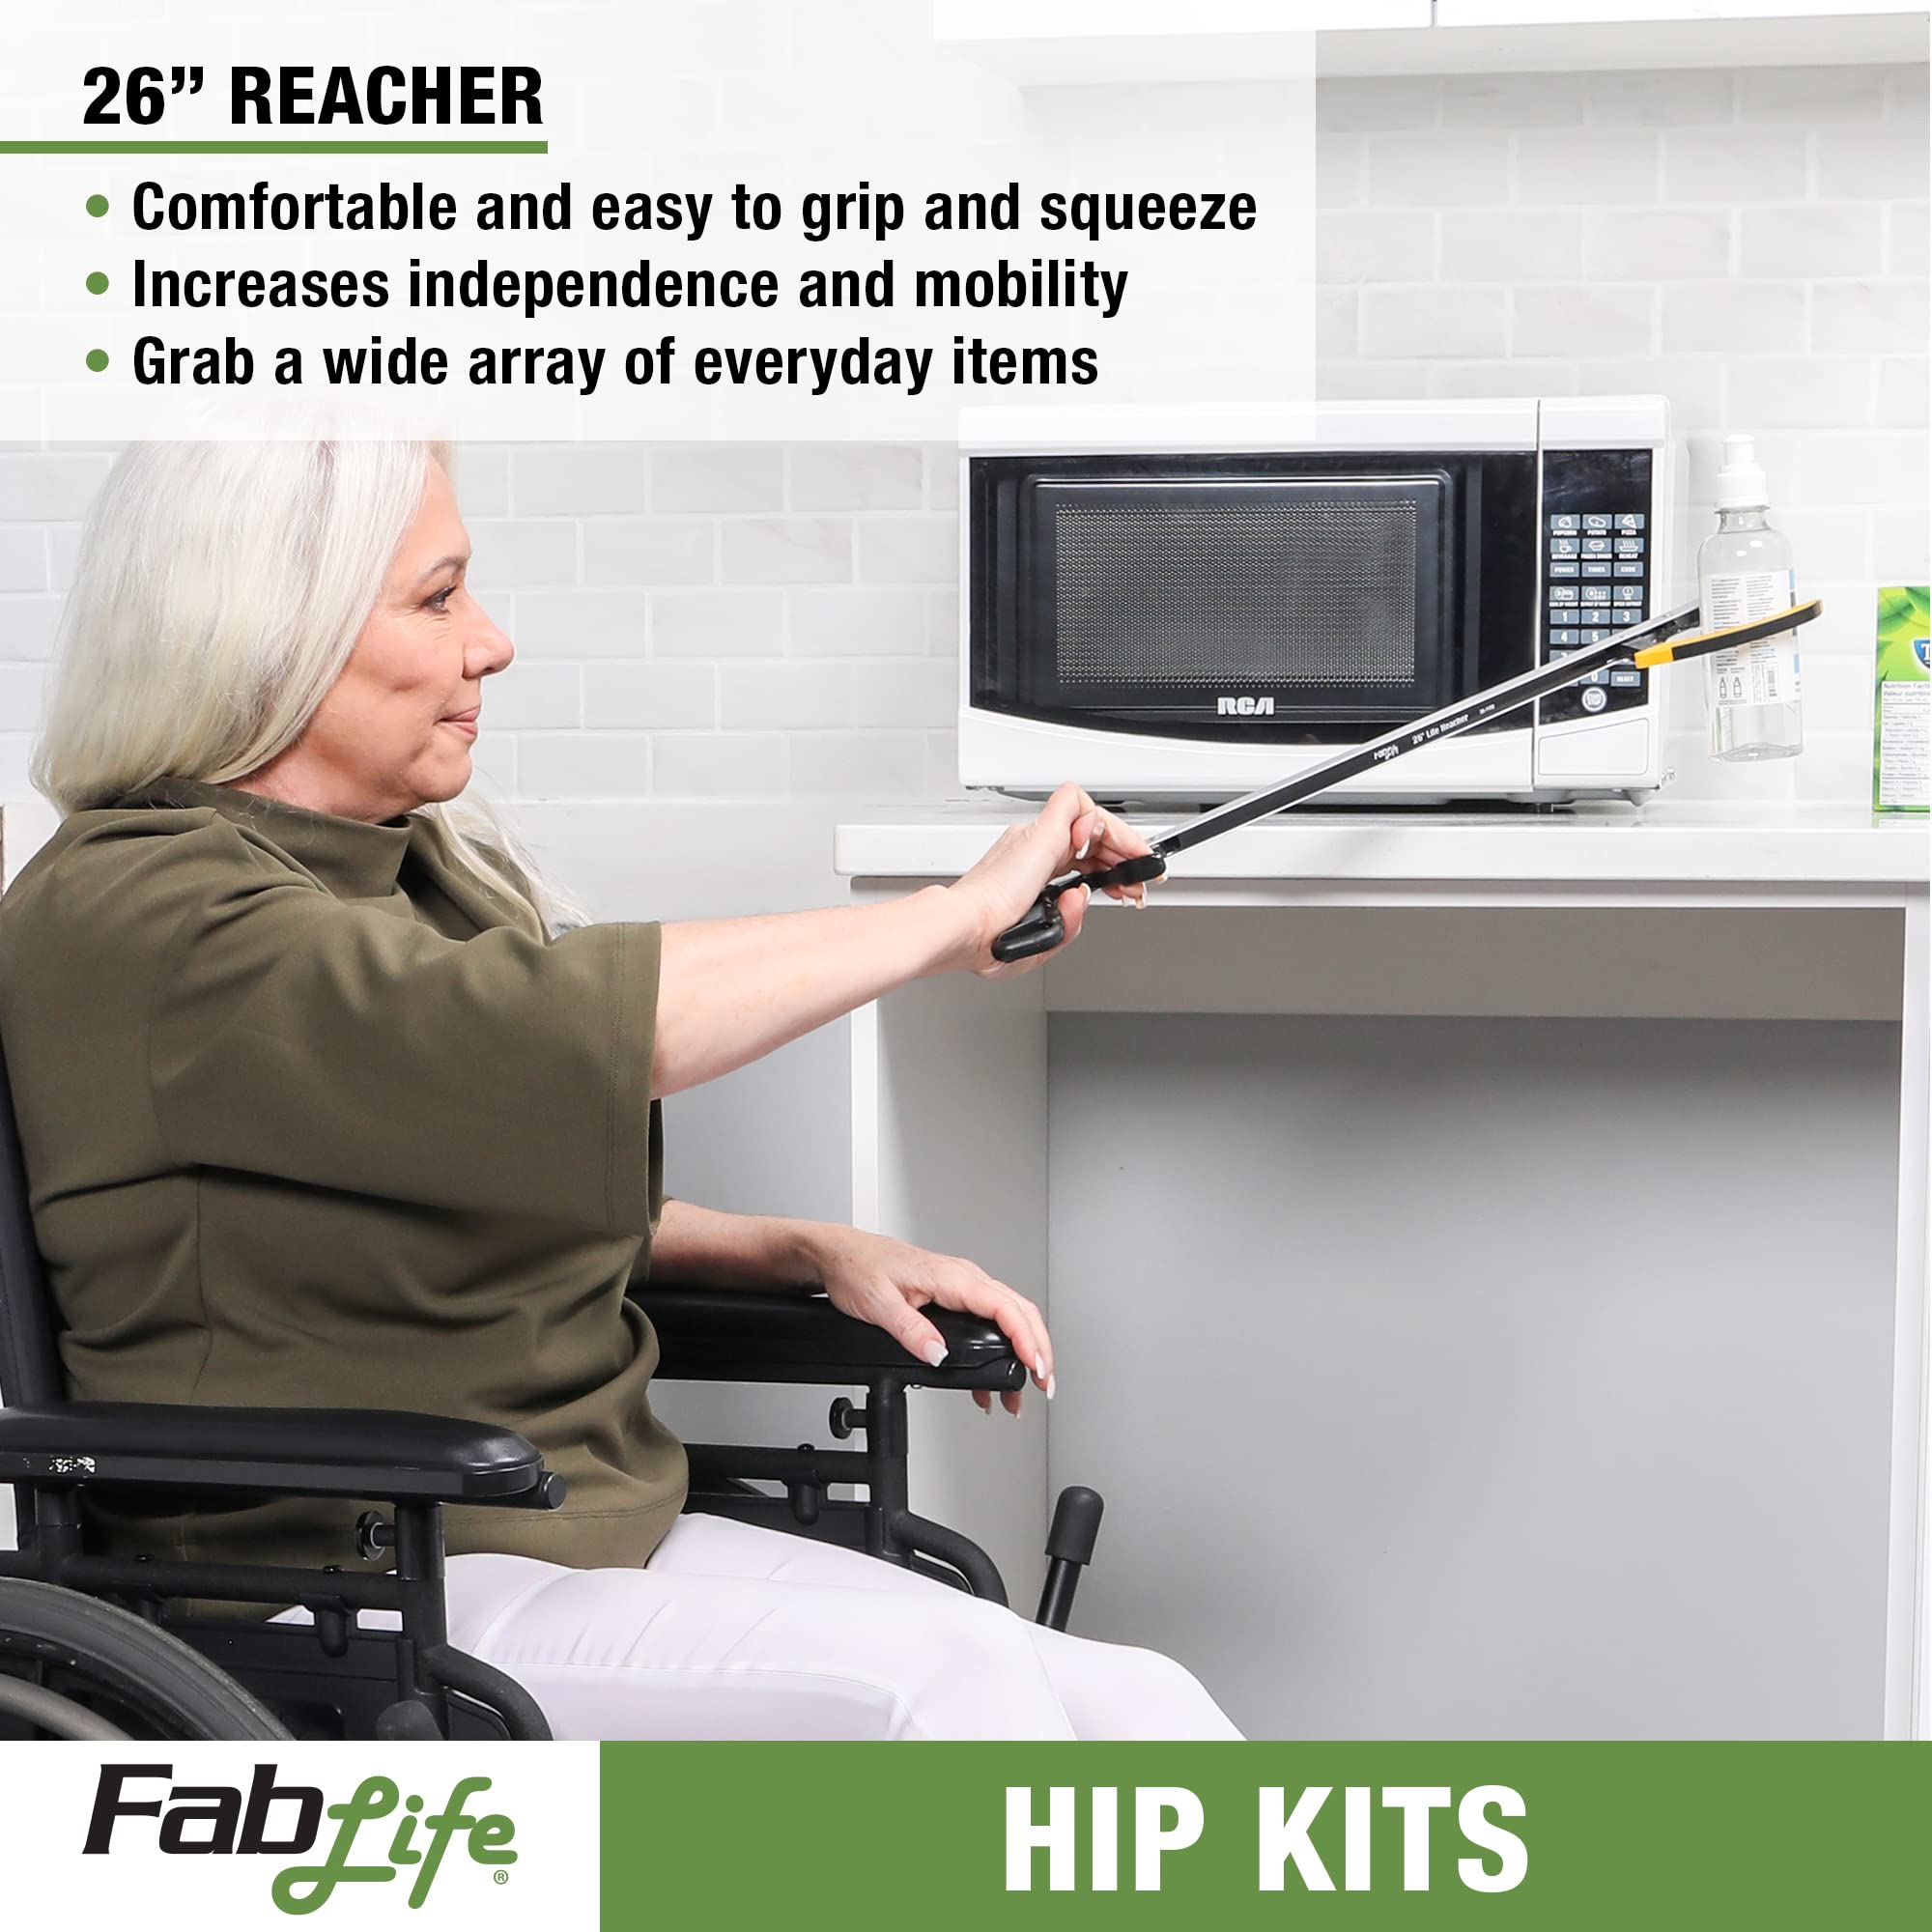 FabLife Hip Kit Daily Living Aids for Mobility, Hip Replacement Recovery, Knee and Back Surgery Includes Grabber Reacher, Bath Sponge Stick, Sock Aid, Shoehorn, Dressing Stick